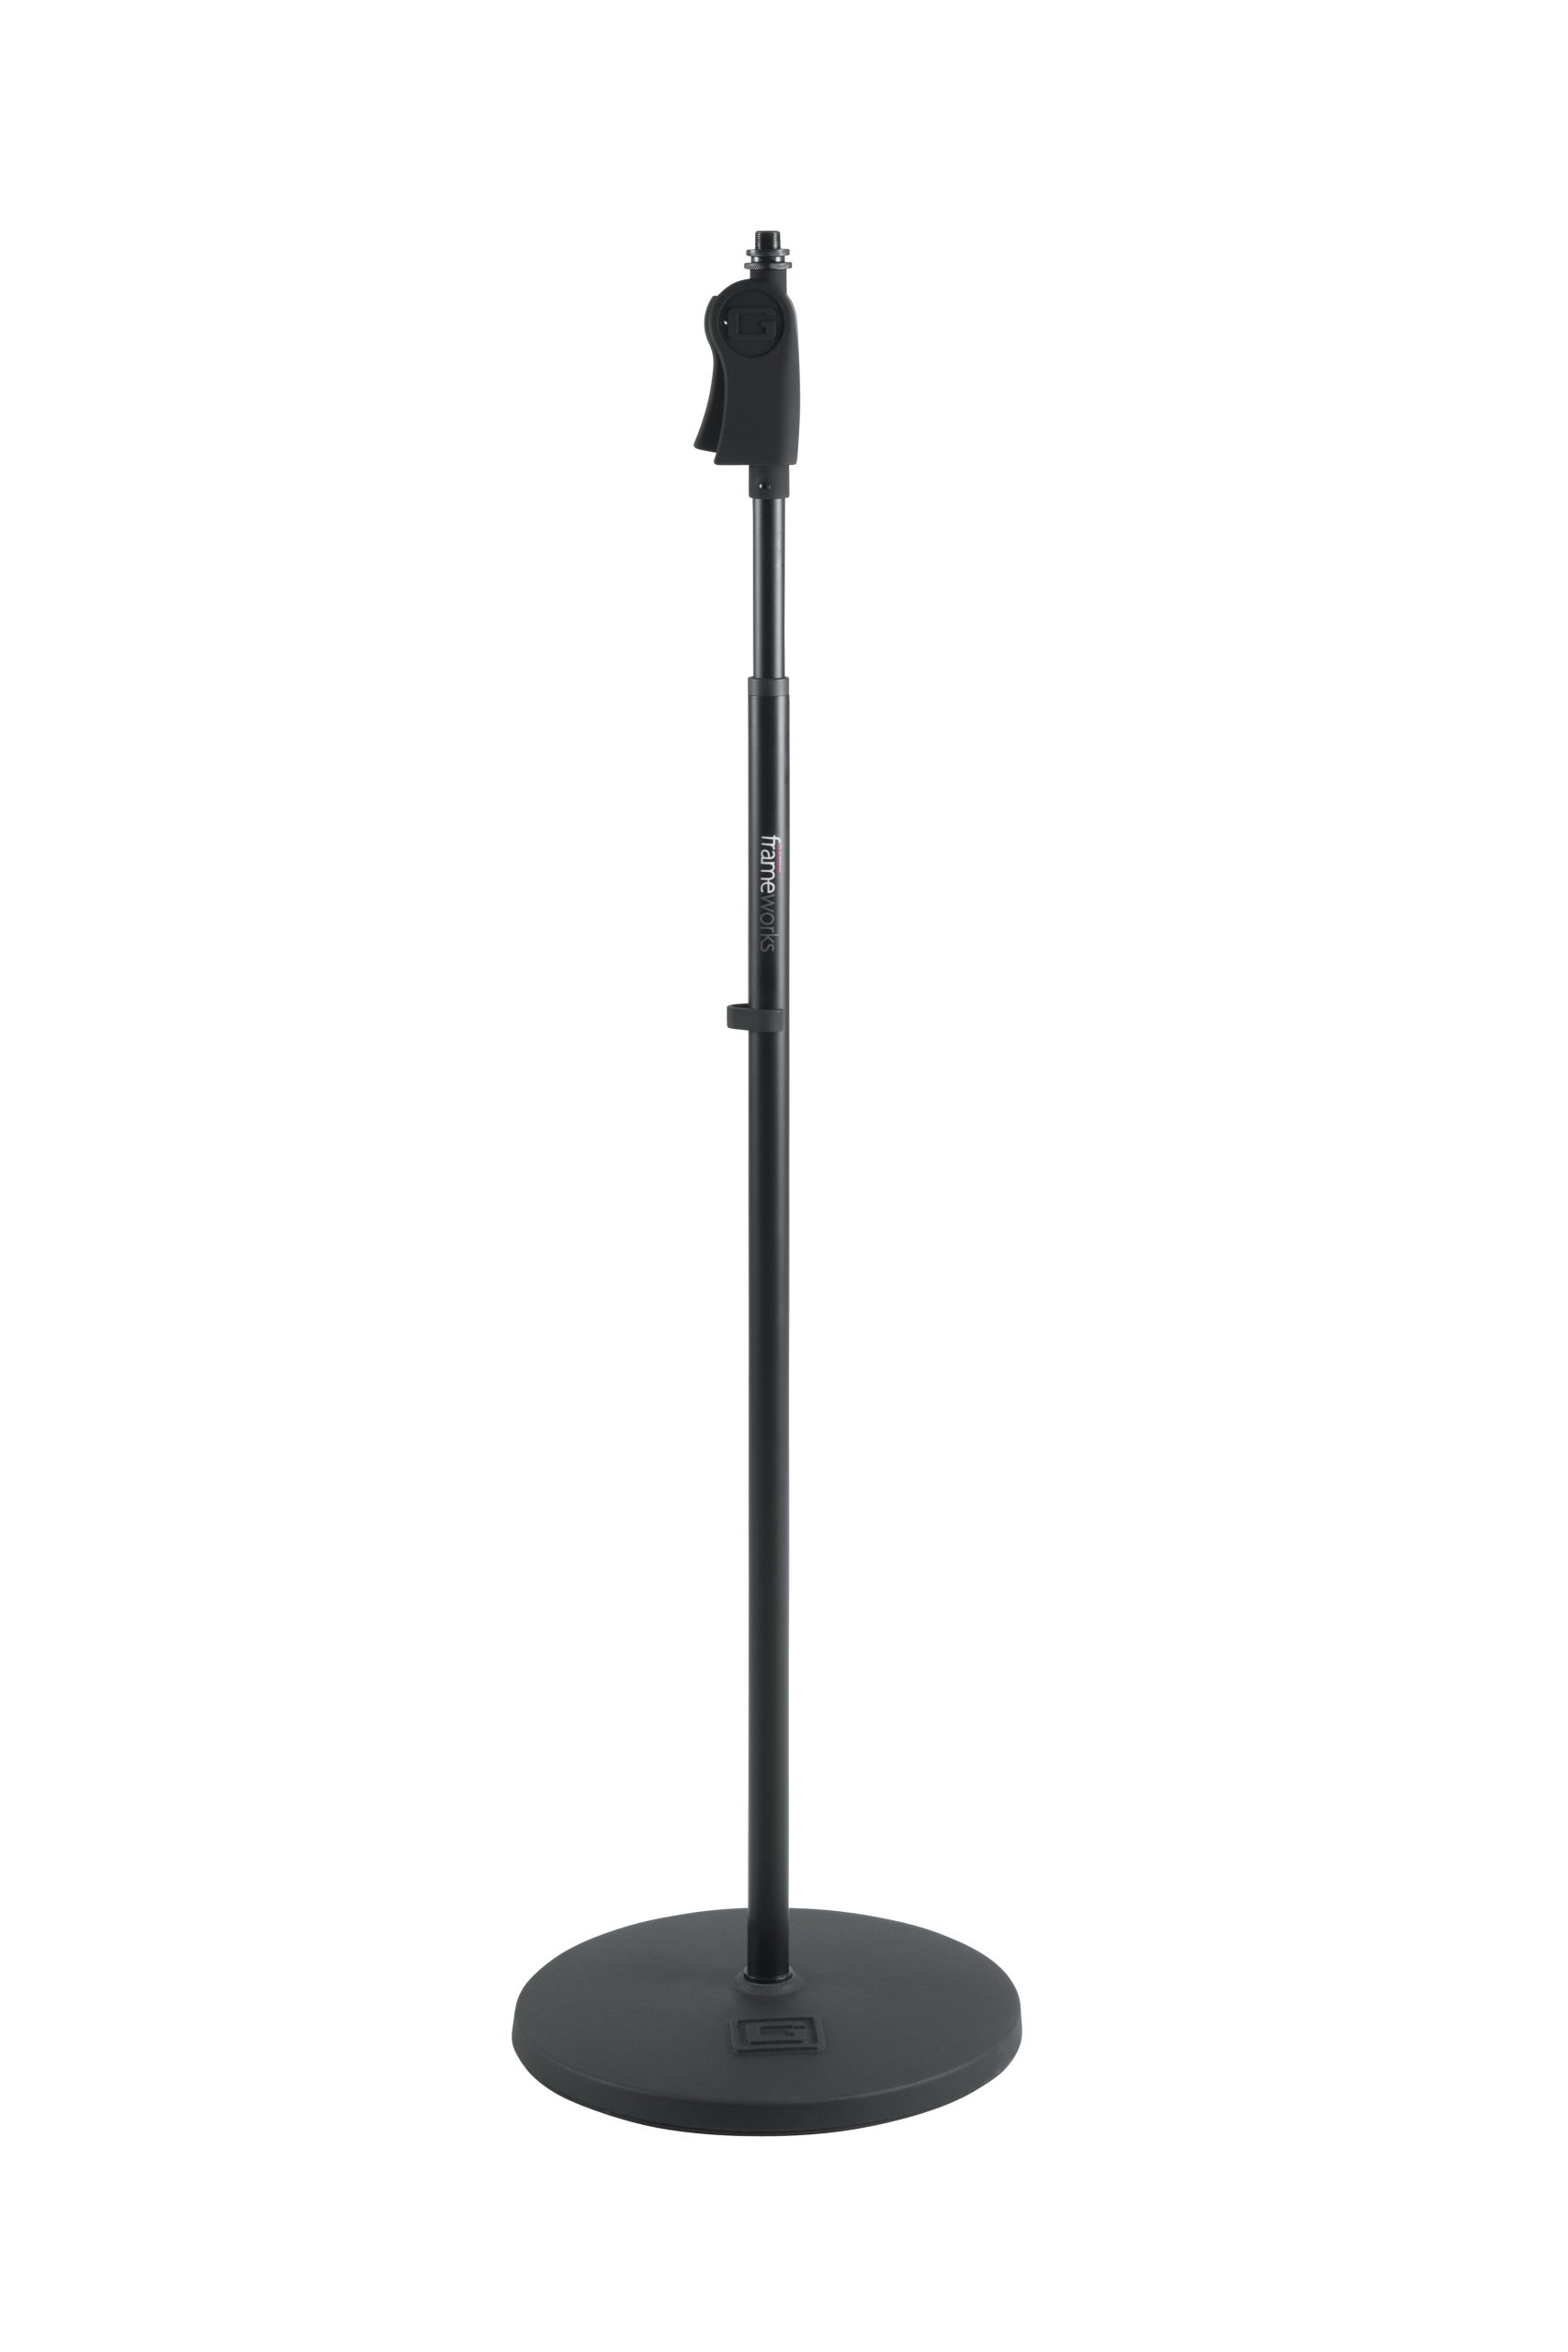 Deluxe 12″ Round Base Mic Stand-GFW-MIC-1201